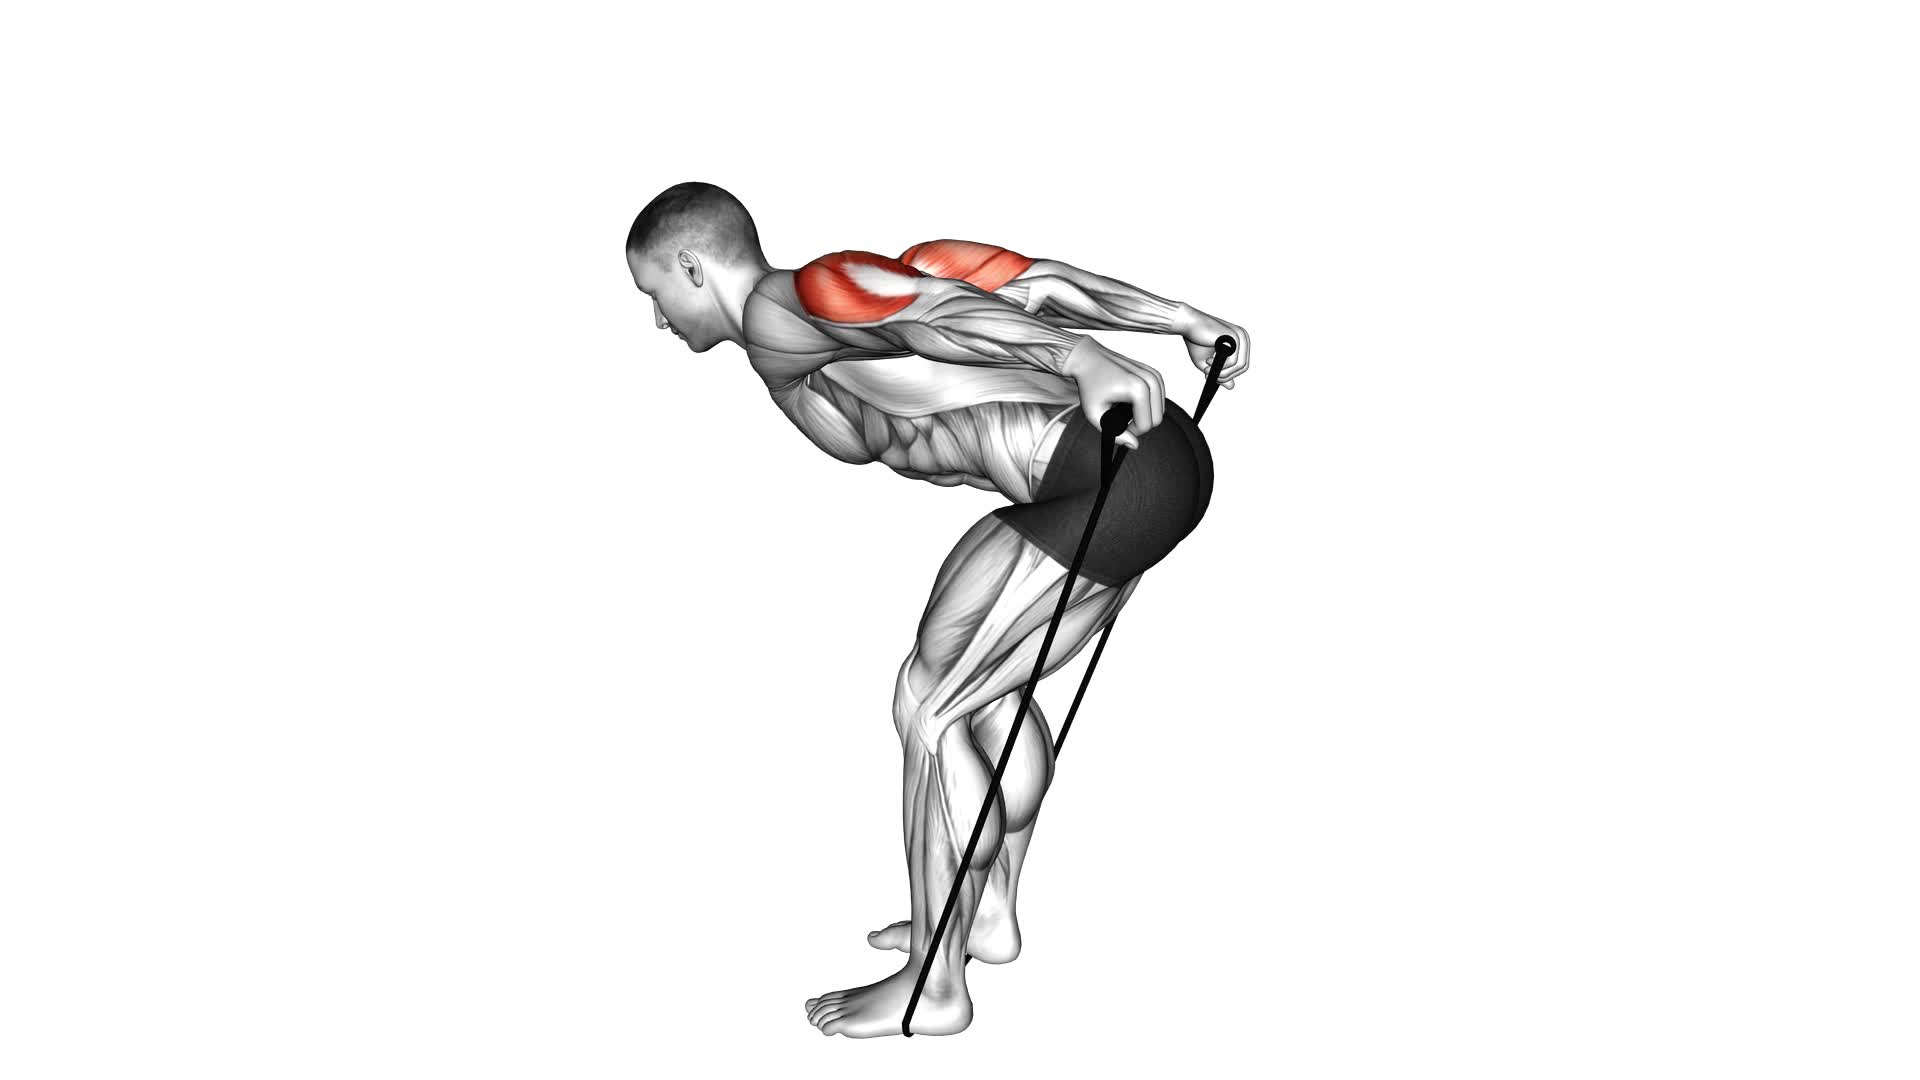 Band Triceps Kickback - Video Exercise Guide & Tips